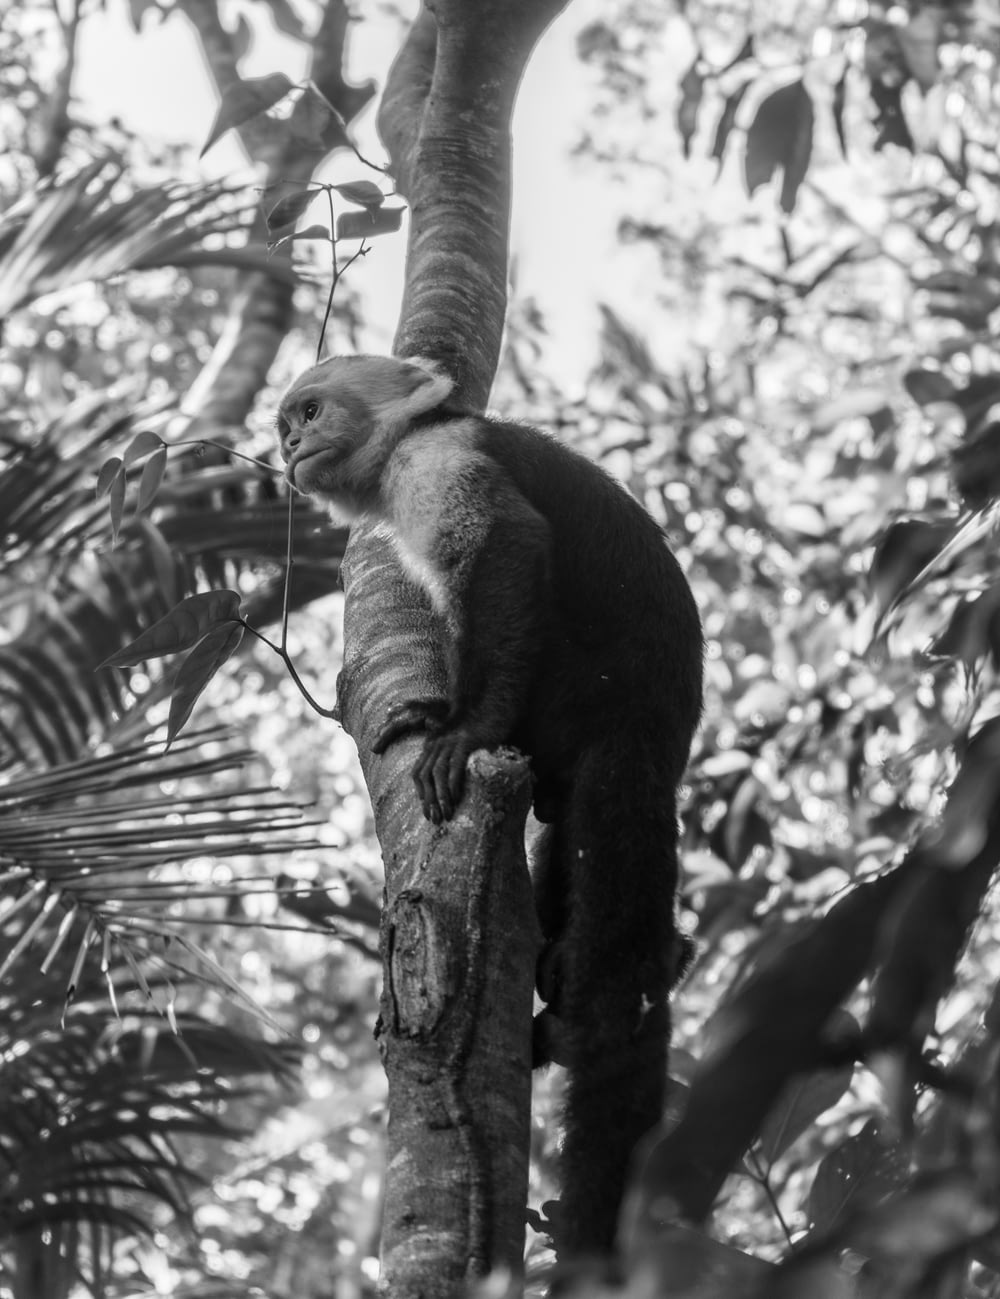 monkey on tree branch in grayscale photography